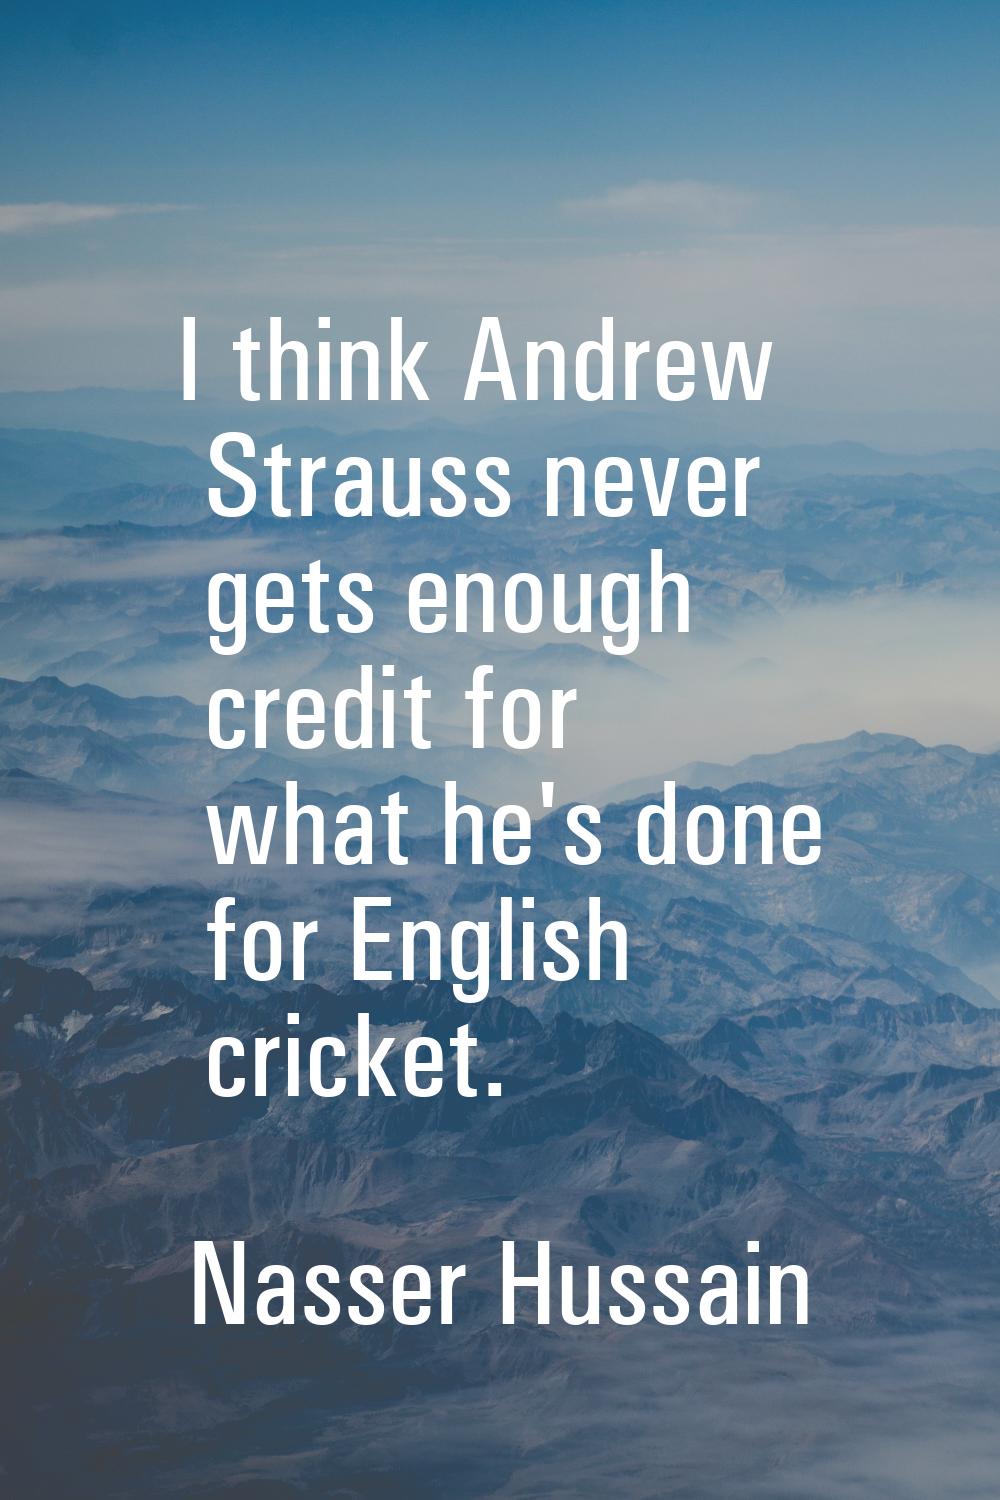 I think Andrew Strauss never gets enough credit for what he's done for English cricket.